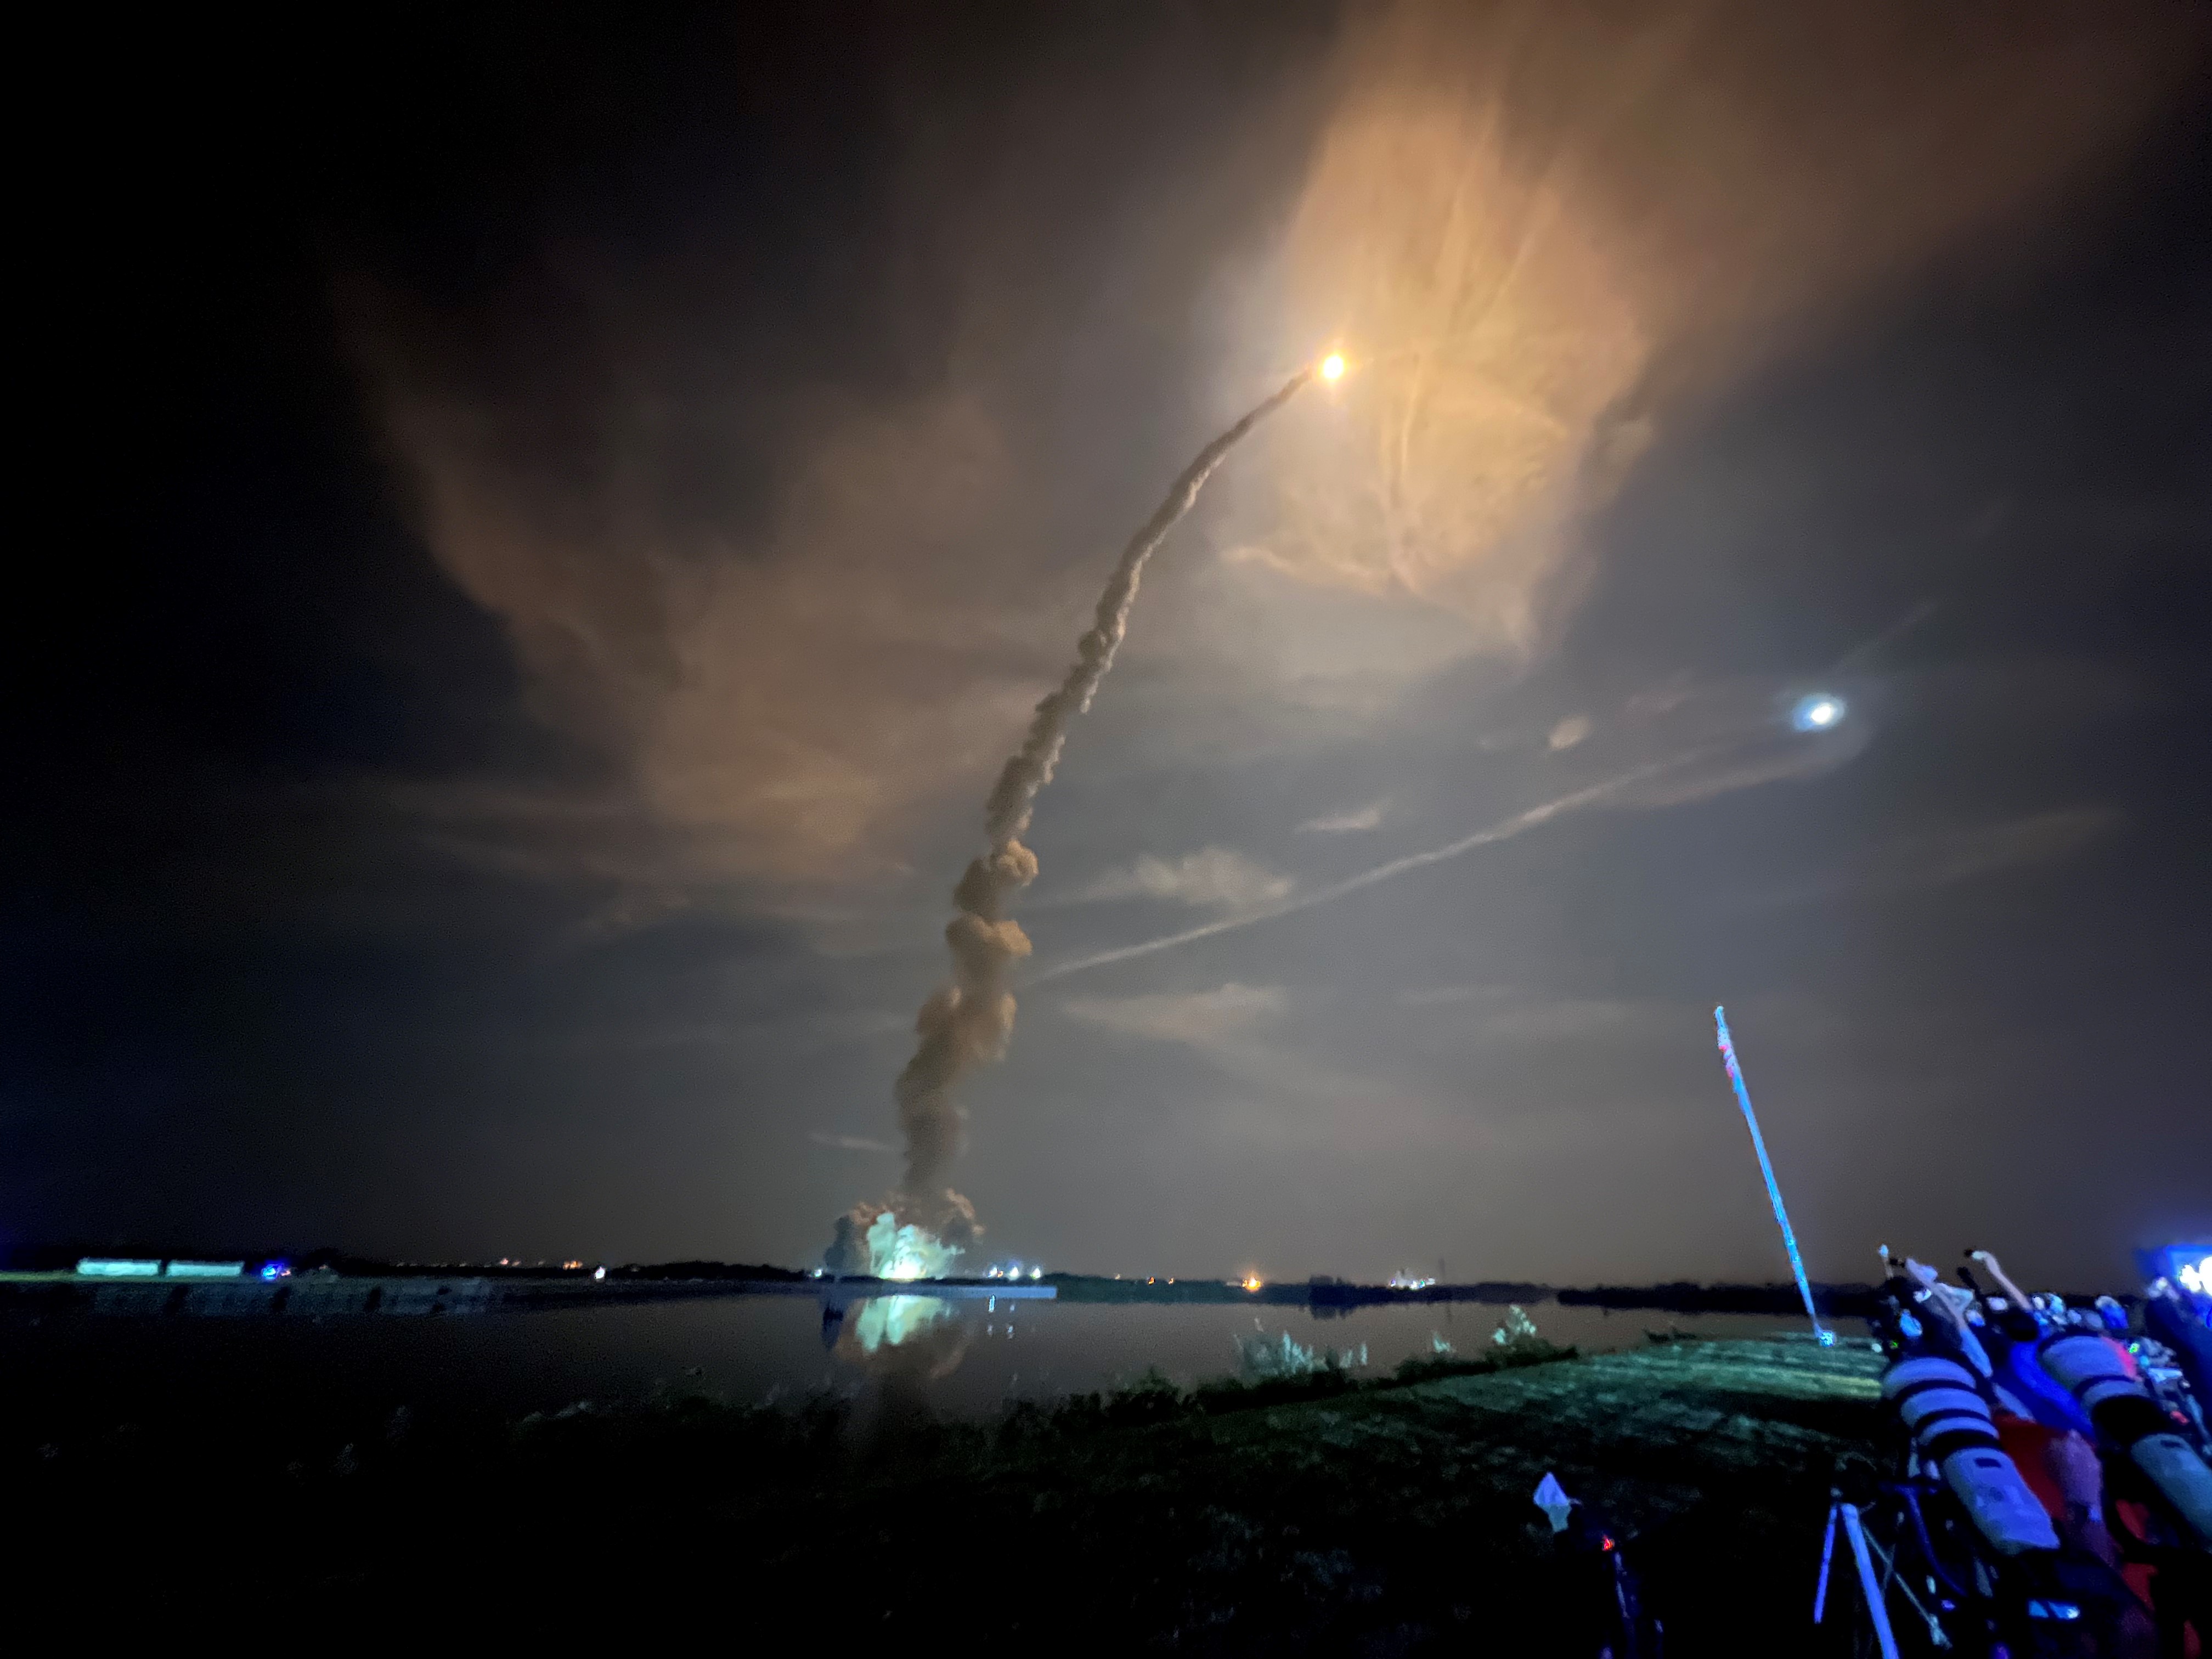 The Artemis 1 Space Launch System rocket lights up the night sky at Kennedy Space Center on Nov. 16, 2022, illuminating the smoke trail left in its wake.